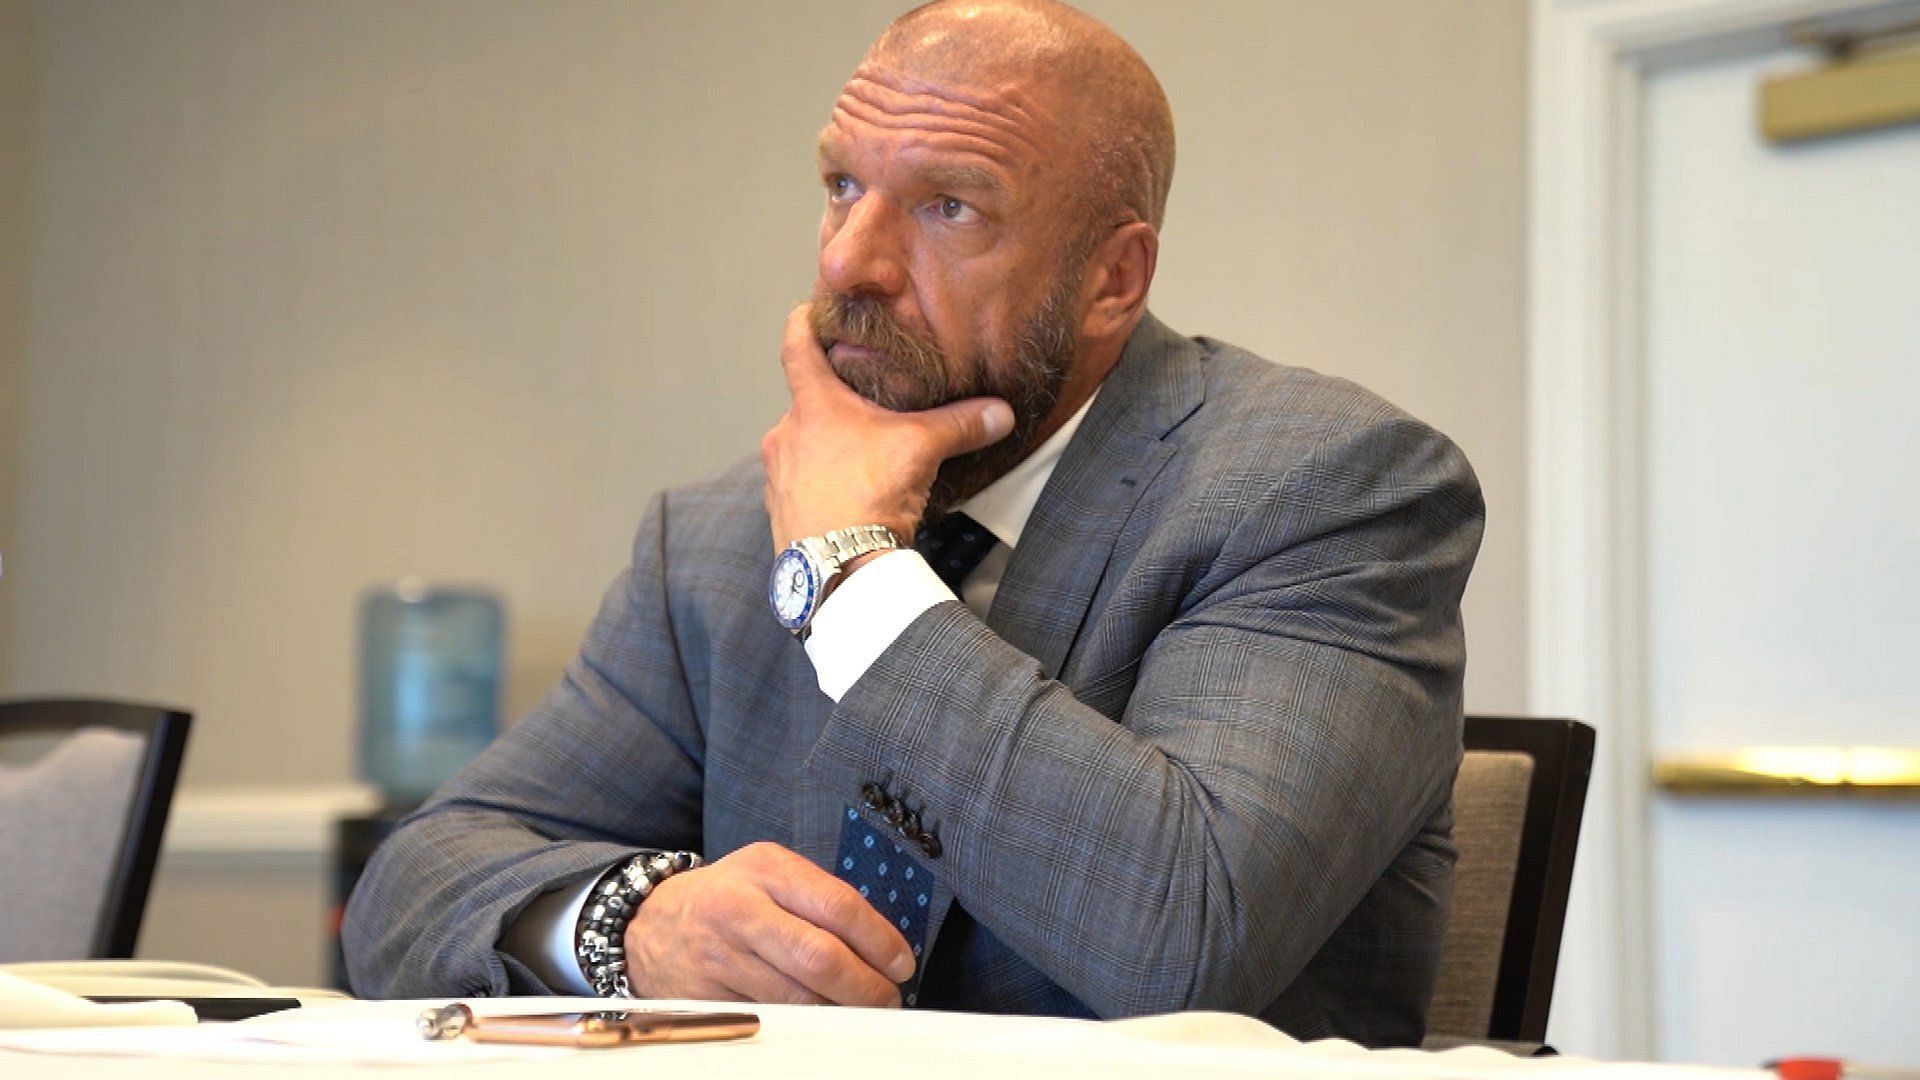 Triple H works in his office at WWE HQ